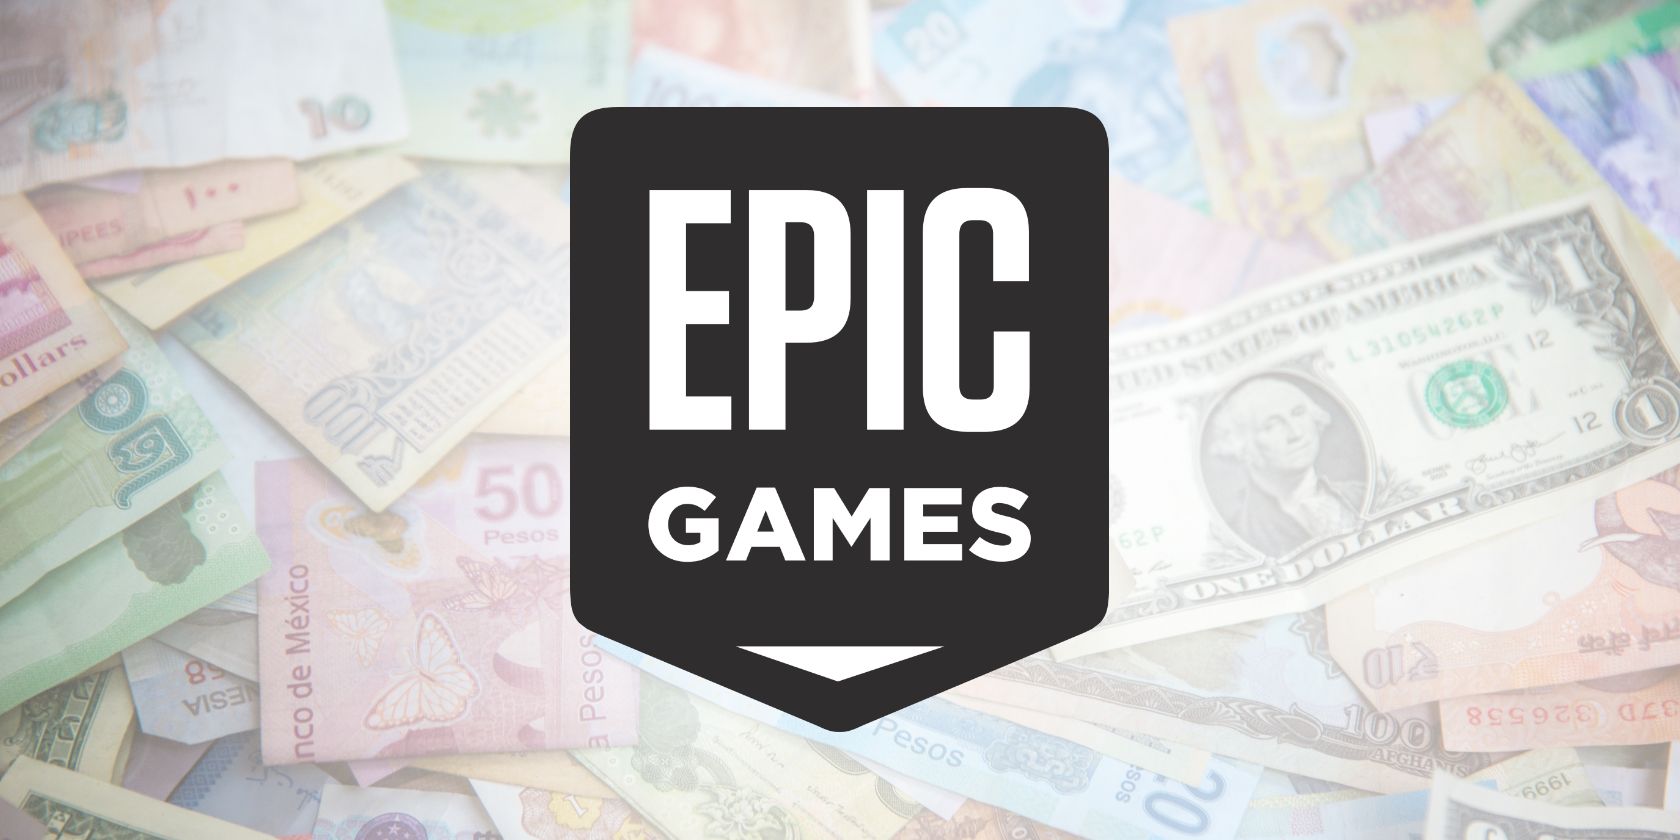 Epic Games Store Will Now Pay You Back For Buying Games